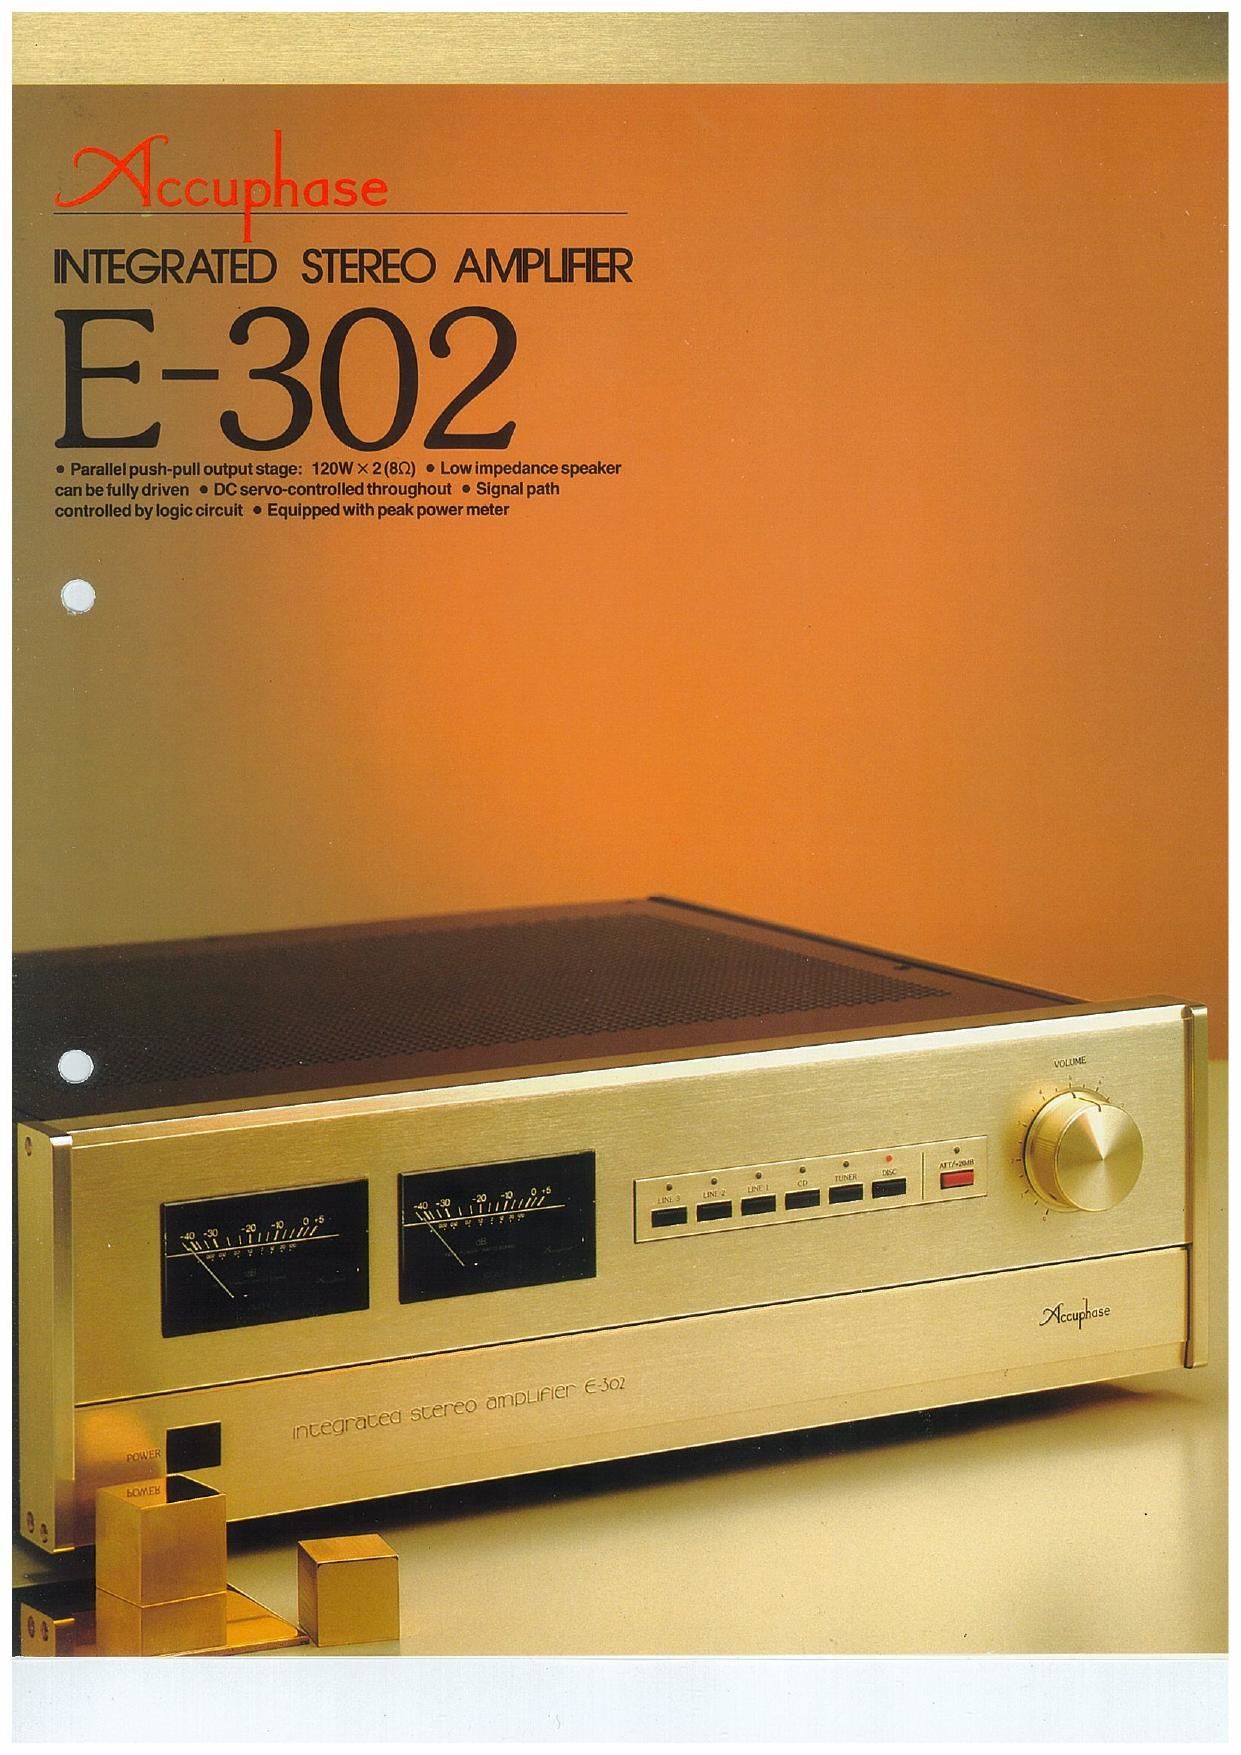 Accuphase E 302 Brochure